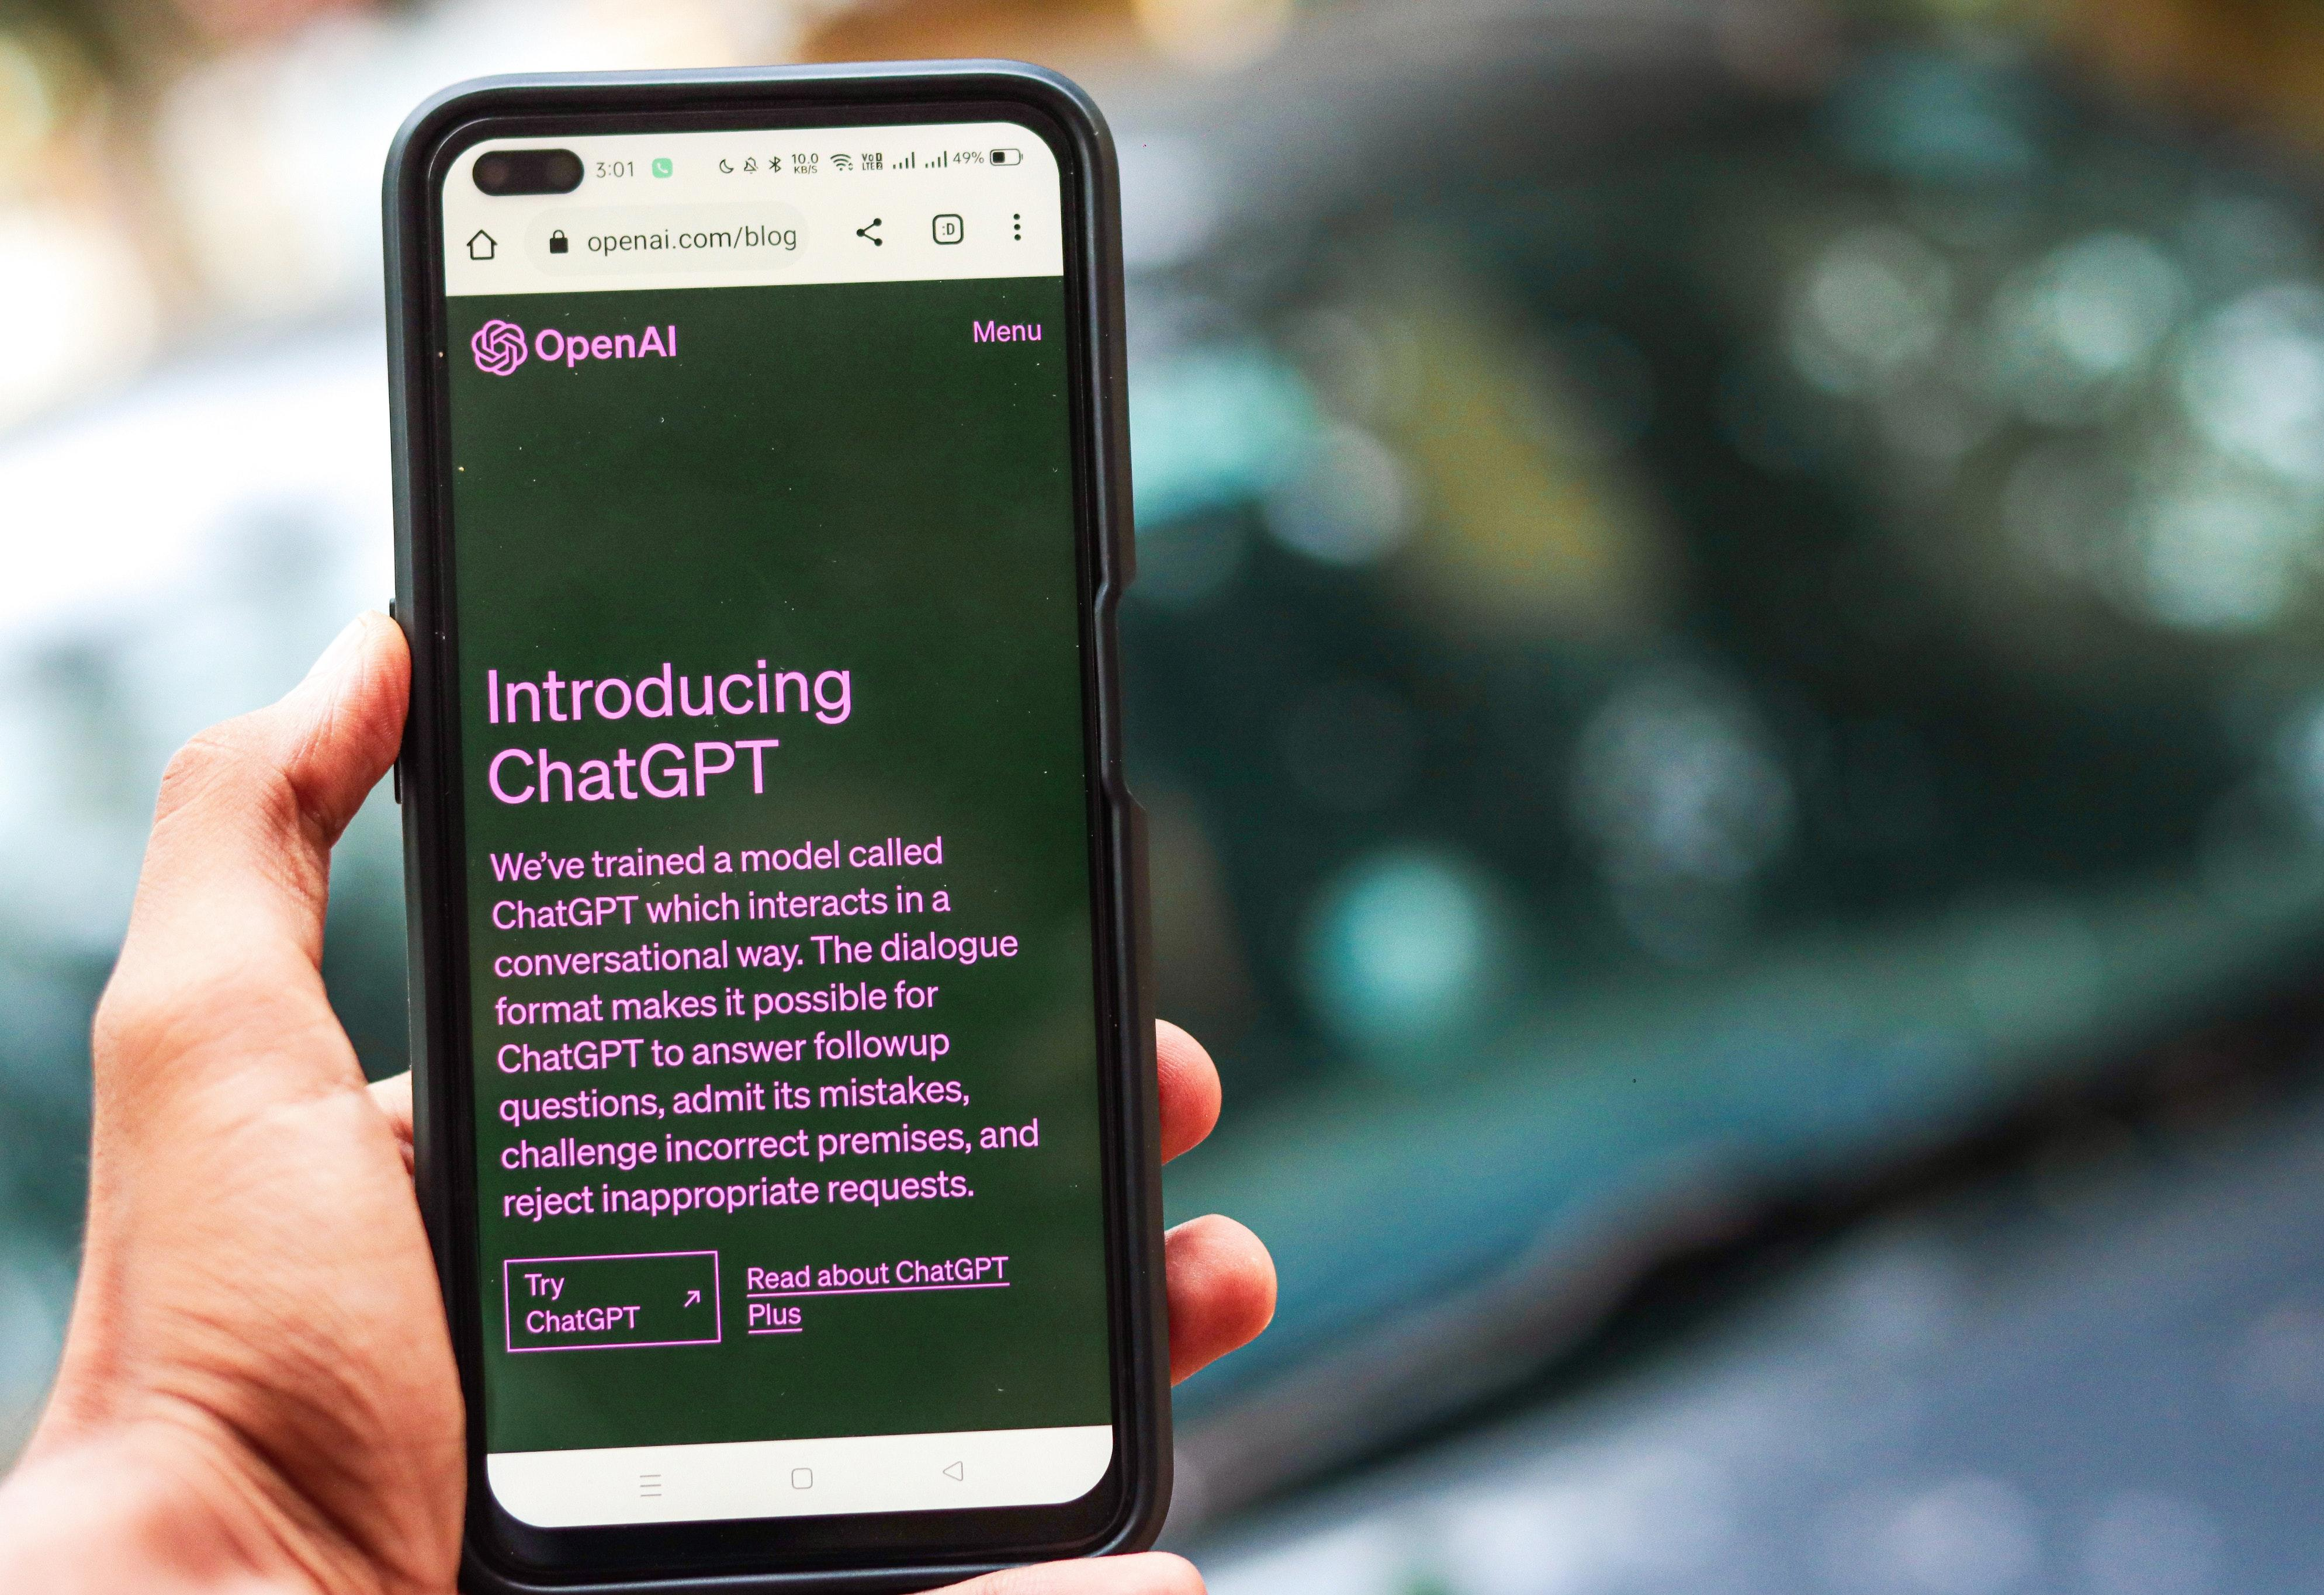 Warning: Don't Download the ChatGPT Mobile App